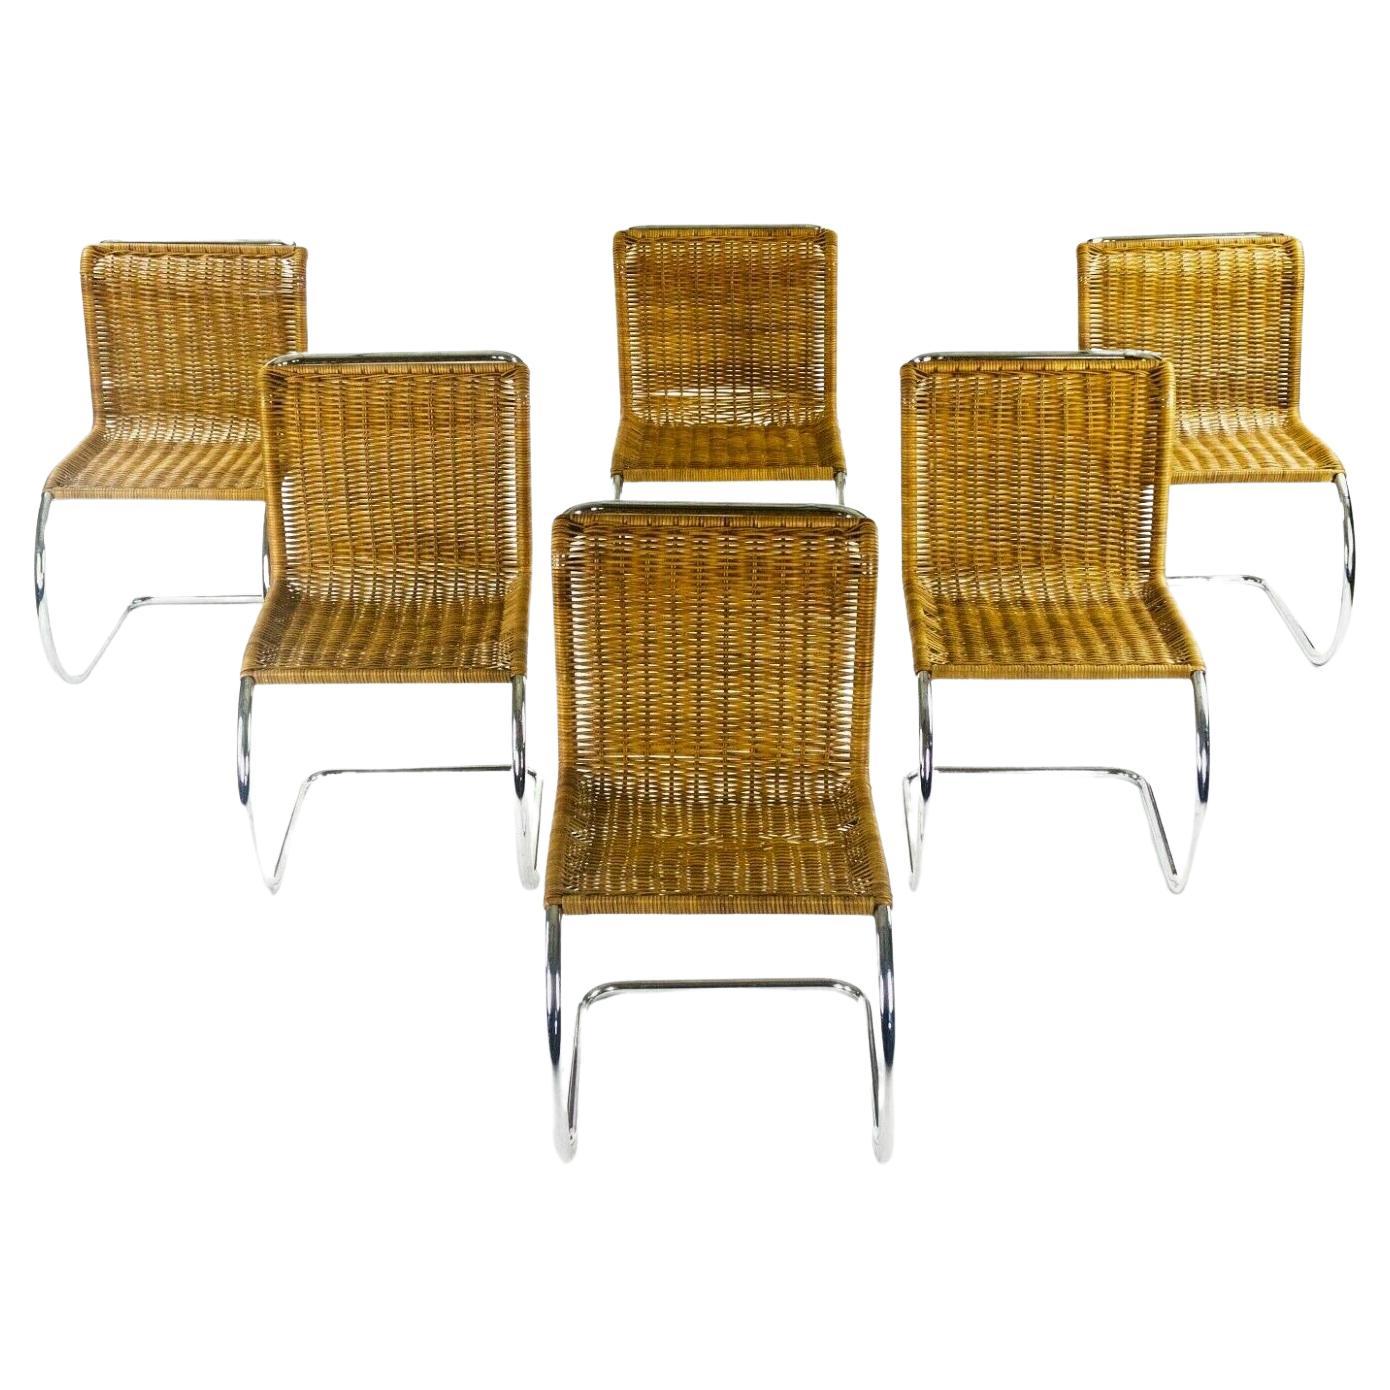 1970s Set of 6 Mies Van Der Rohe for Knoll MR10 Dining Chairs in Rattan & Chrome